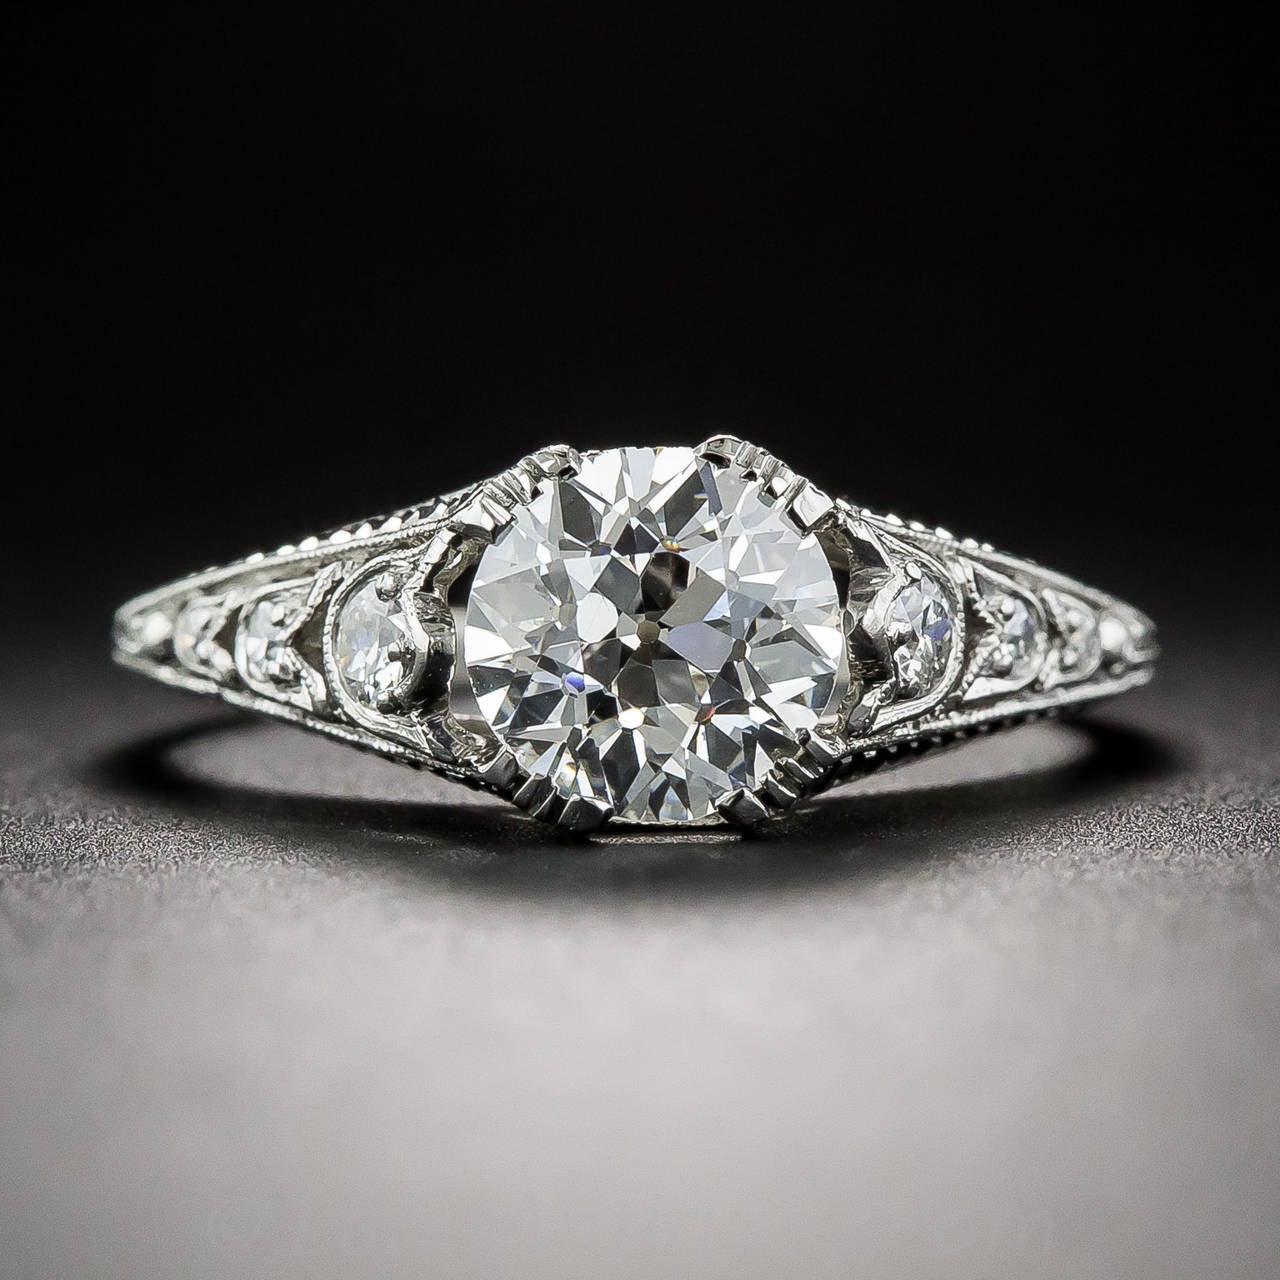 A bright-white European-cut diamond, weighing 1.23 carats (accompanied with a GIA report stating G color VS1 clarity), with exceptional dispersion and brilliance, stars in this splendid, highly distinctive, original Art Deco ring. The mounting,